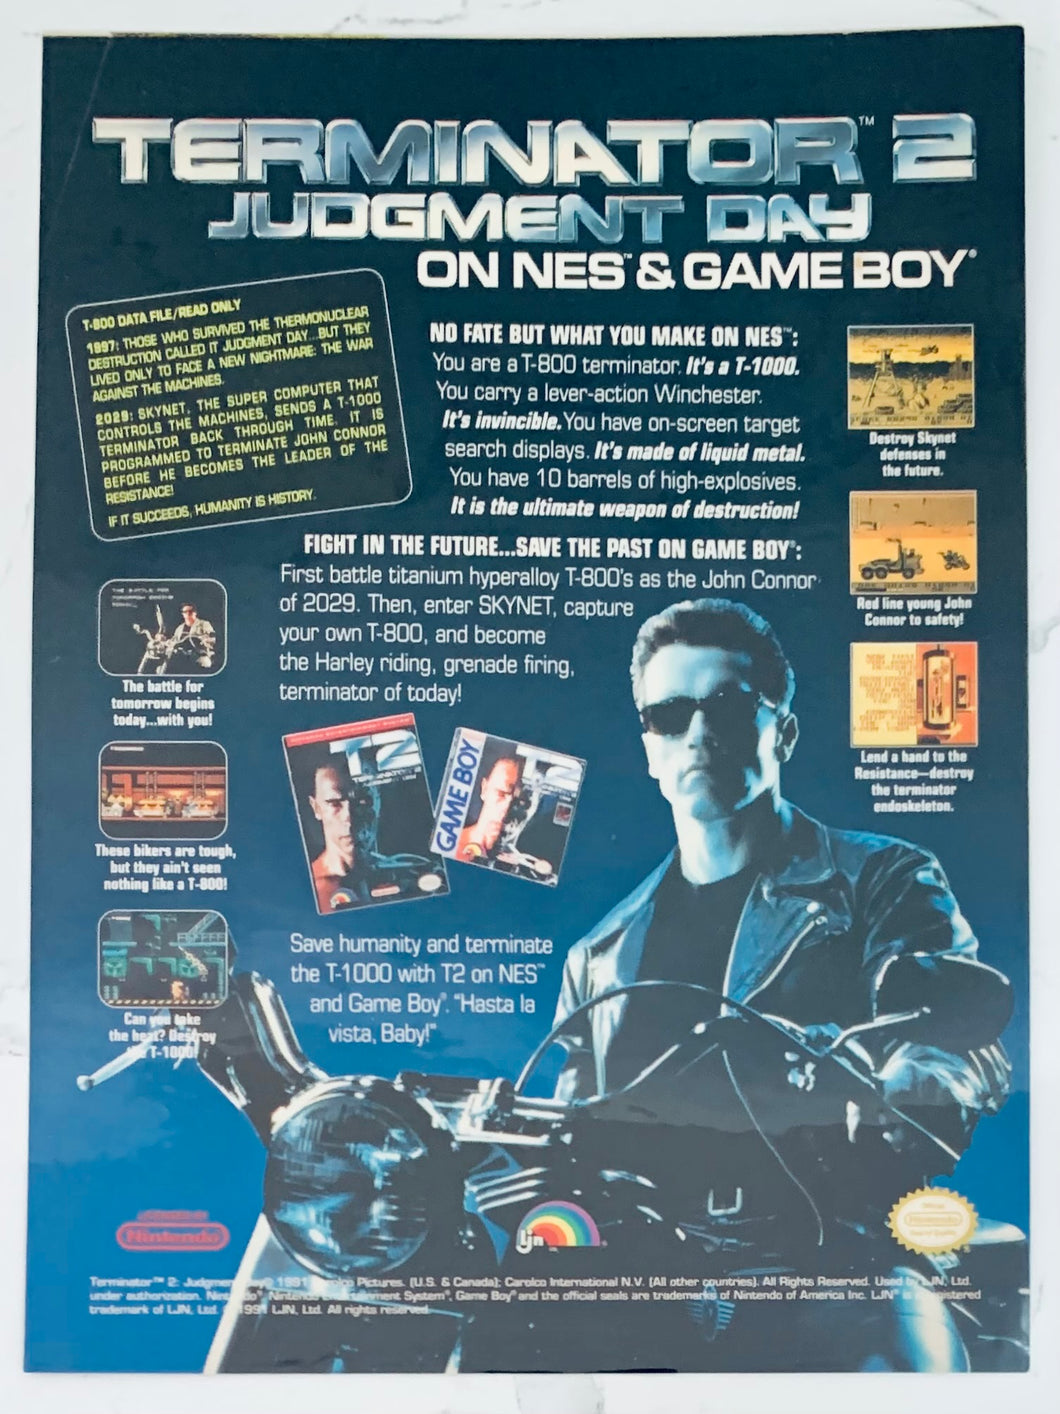 Terminator 2: Judgment Day - NES GB - Original Vintage Advertisement - Print Ads - Laminated A4 Poster